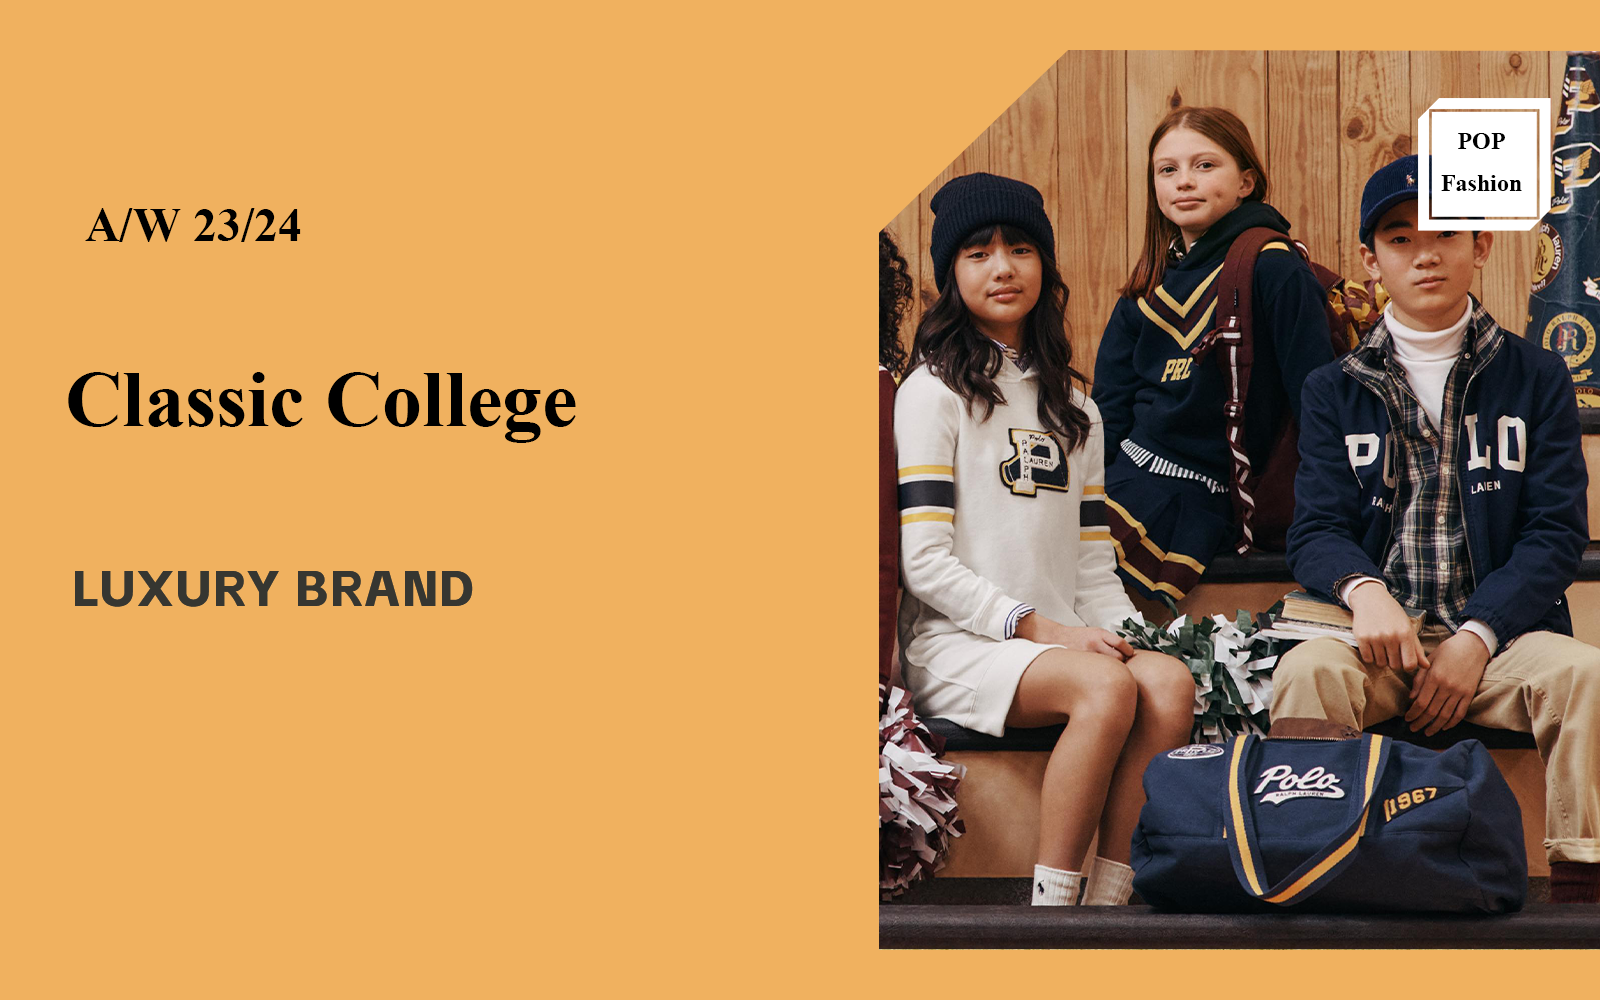 Classic College -- The Comprehensive Analysis of Luxury Brands